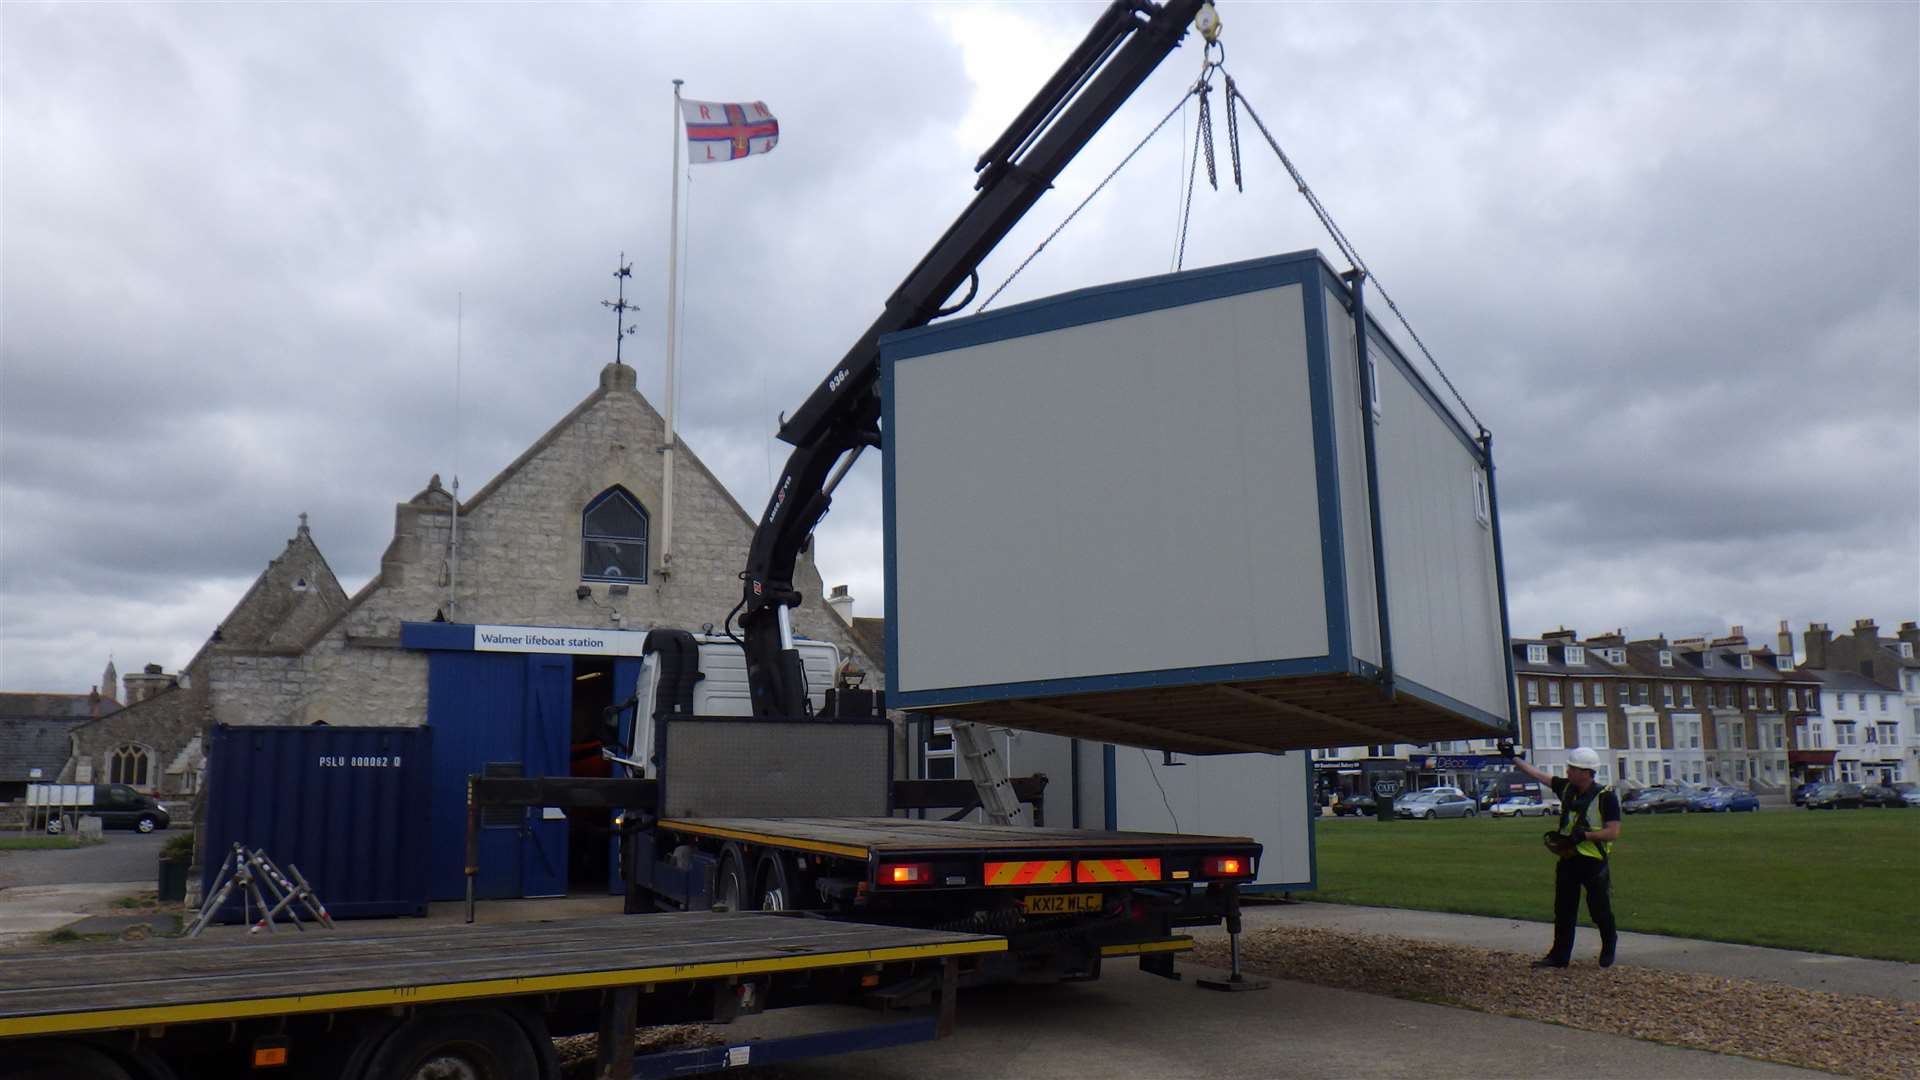 The removal of the temporary containers signifies a new era for the inside of Walmer Lifeboat Station